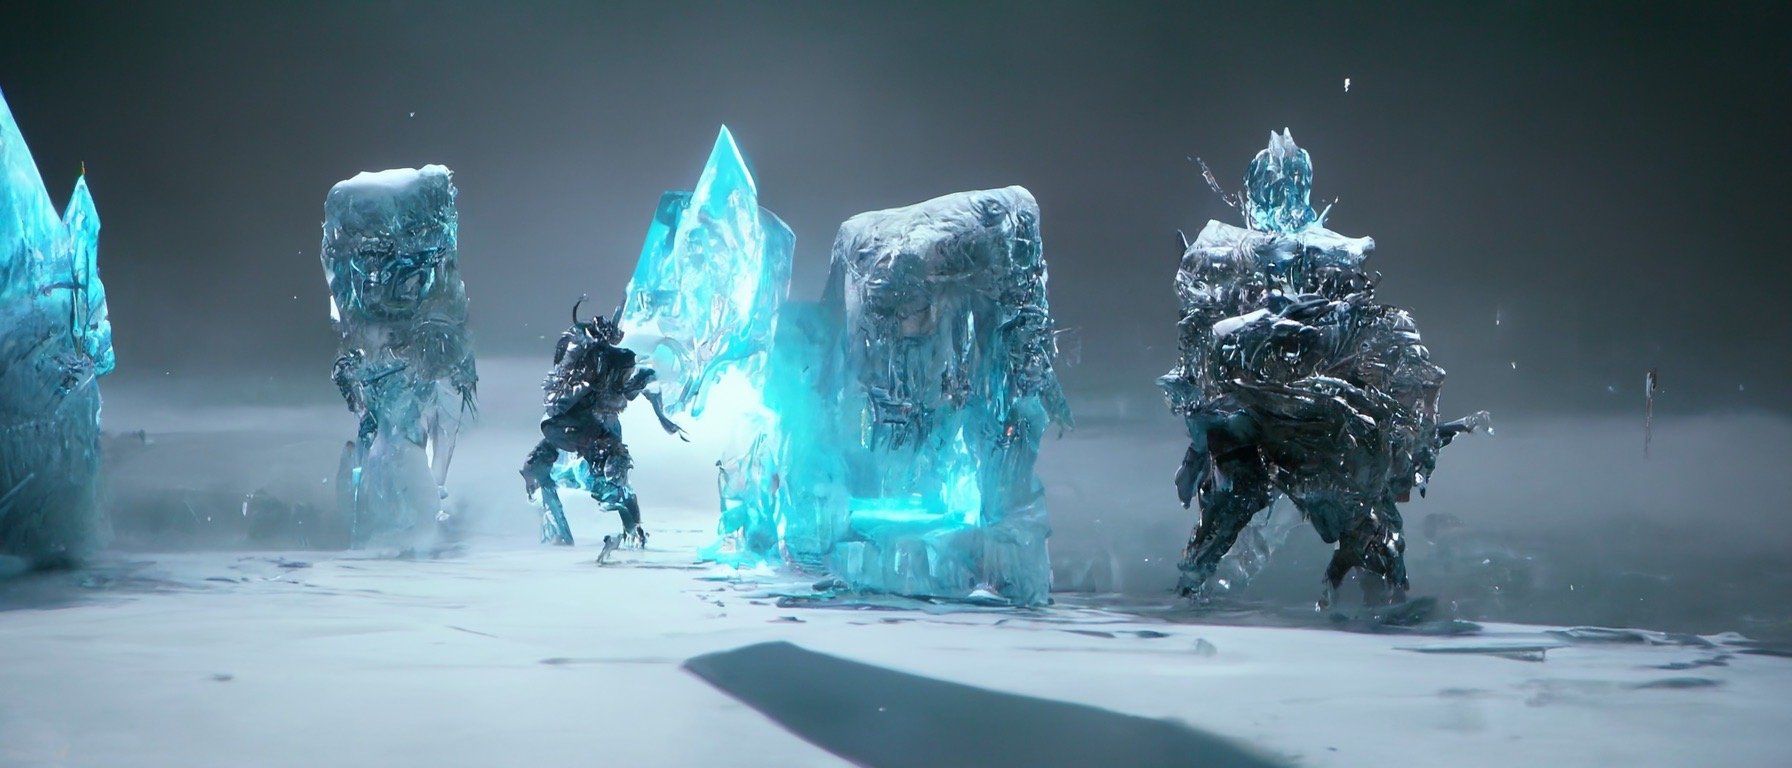 9837d529-44d7-445f-9053-5804e2b3ac1e_S3RAPH_epic_video_game_style_boss_fight_in_ice._8k_cinematic_composition_render_w_2048_h_858.JPG